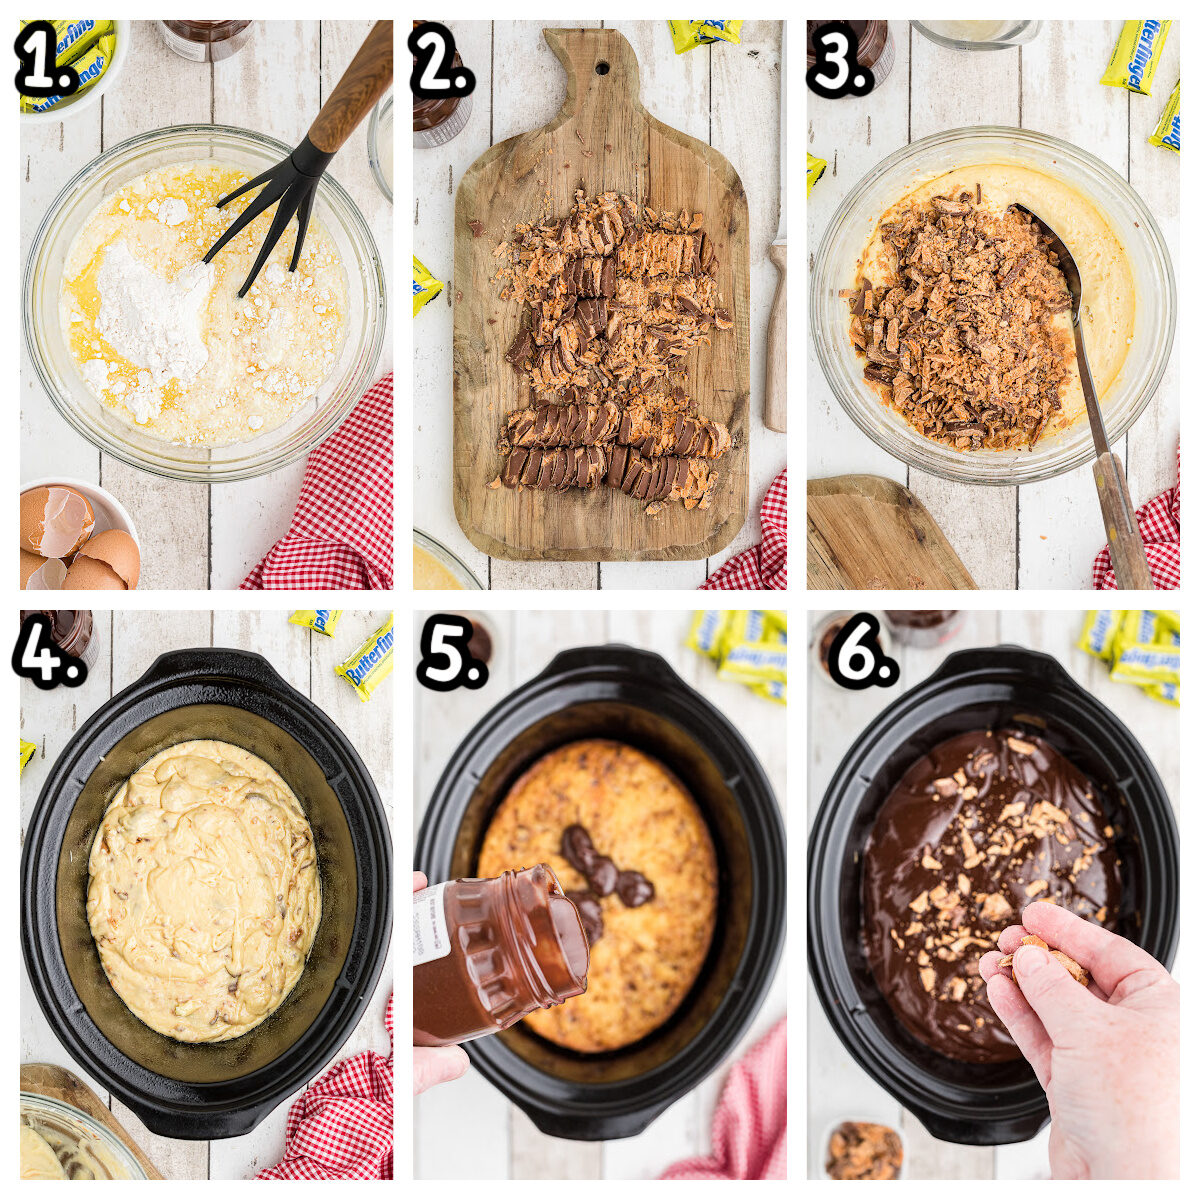 6 images about how to mix cake mix, and assemble butterfinger cake in slow cooker.